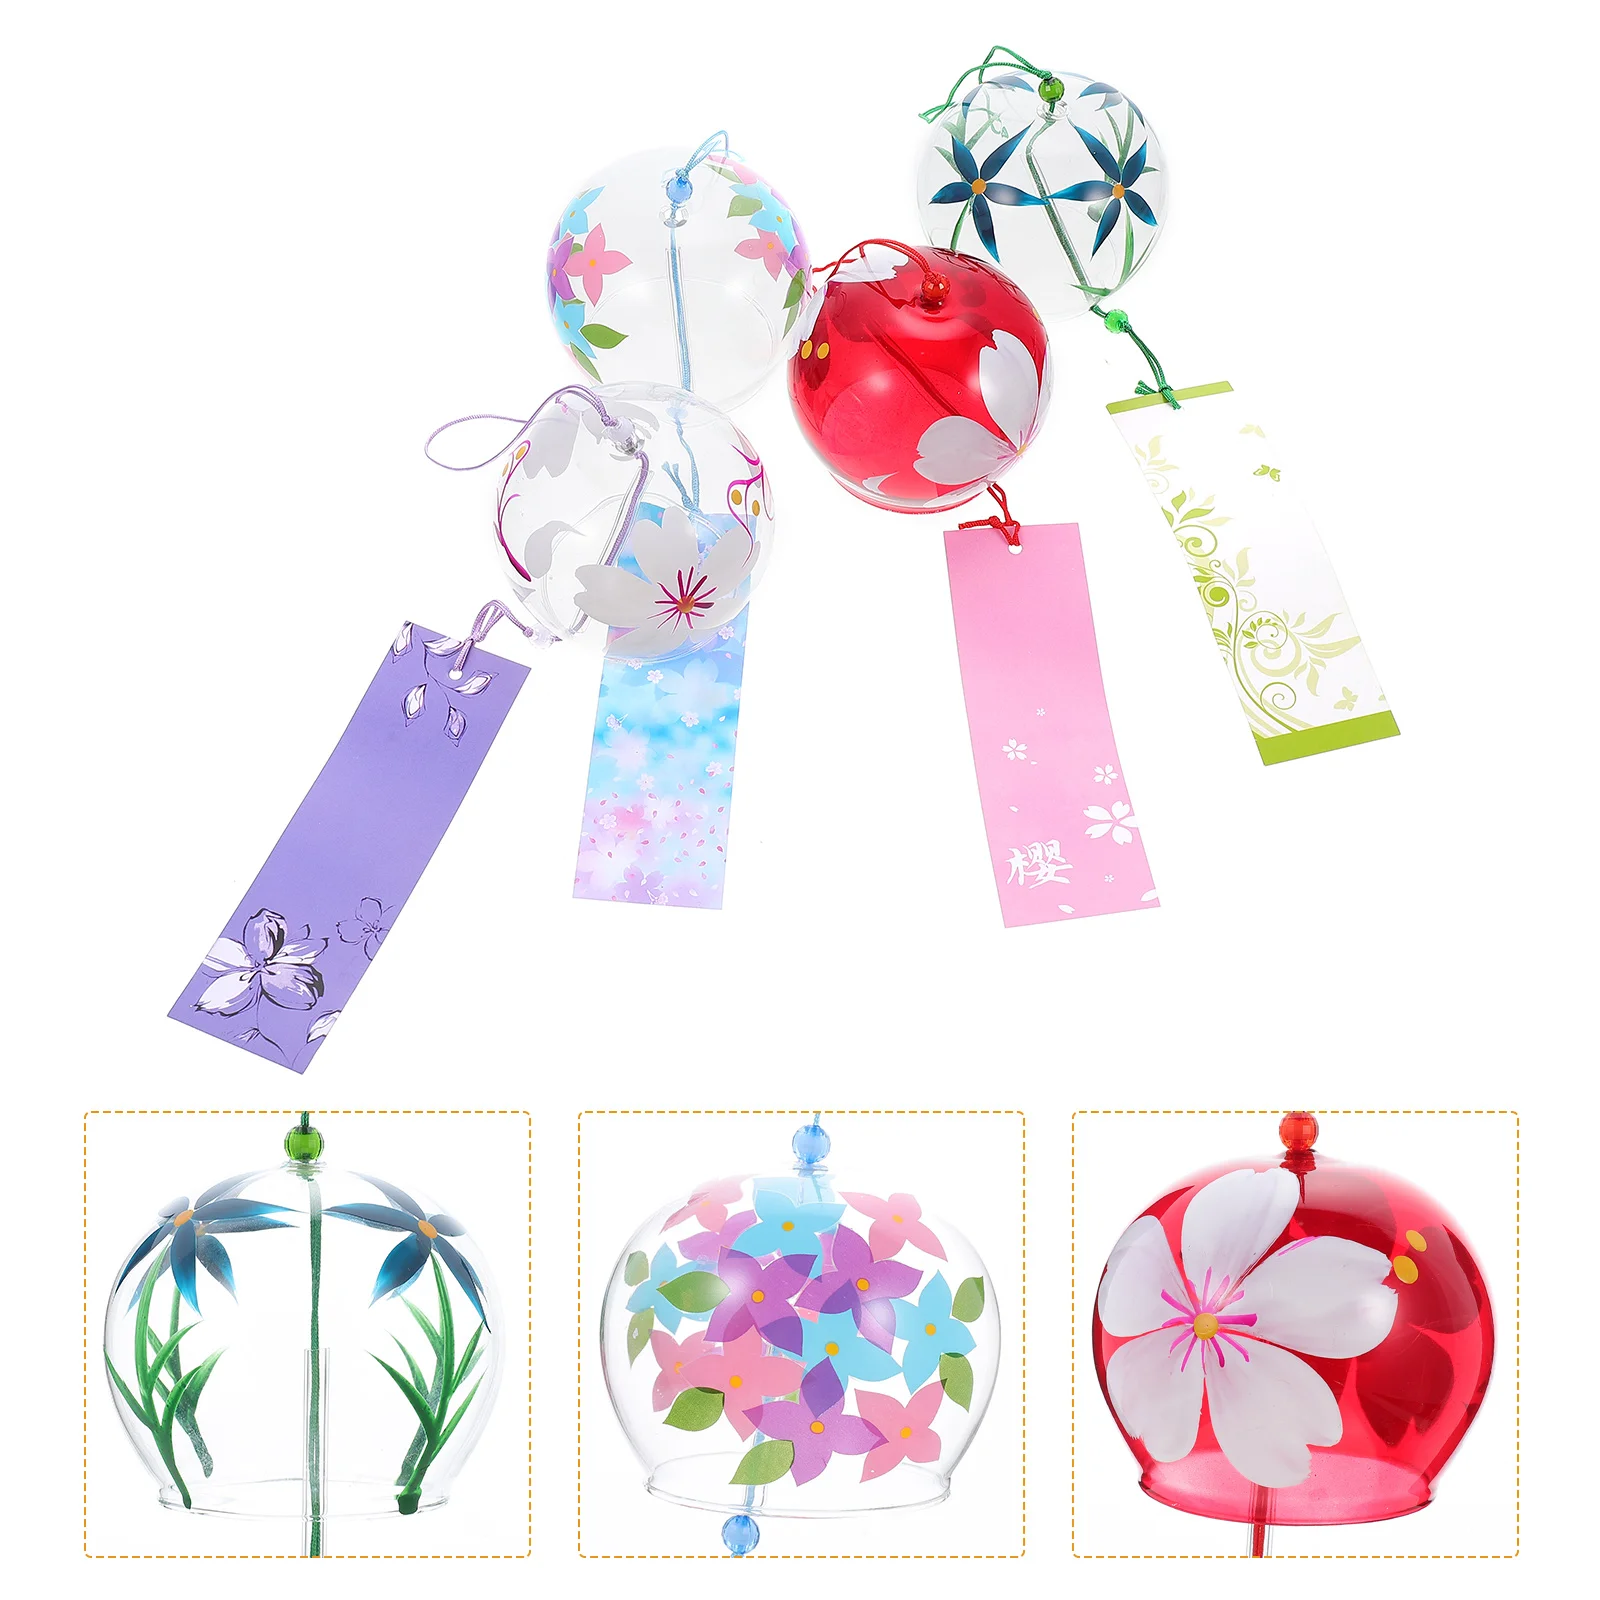 

Glass Hanging Glass Hanging Bells Japanese Fengshui Decor Luck Blessing Wind Chime Balcony Glass Wind Bells Wind Bell Decoration